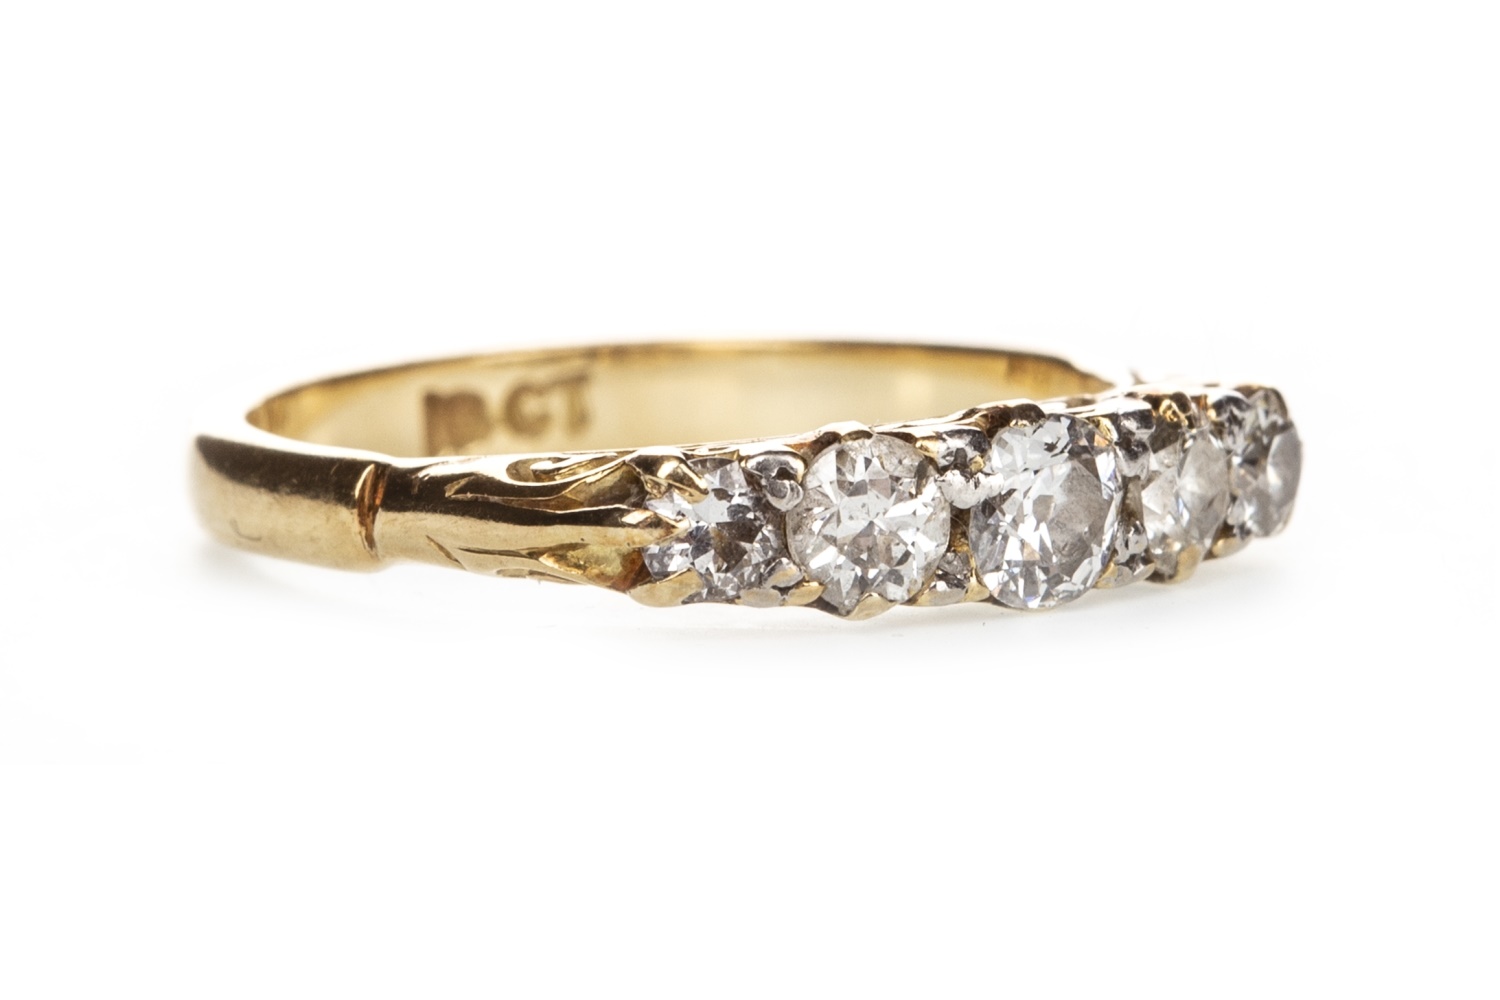 A VICTORIAN DIAMOND FIVE STONE RING - Image 2 of 2